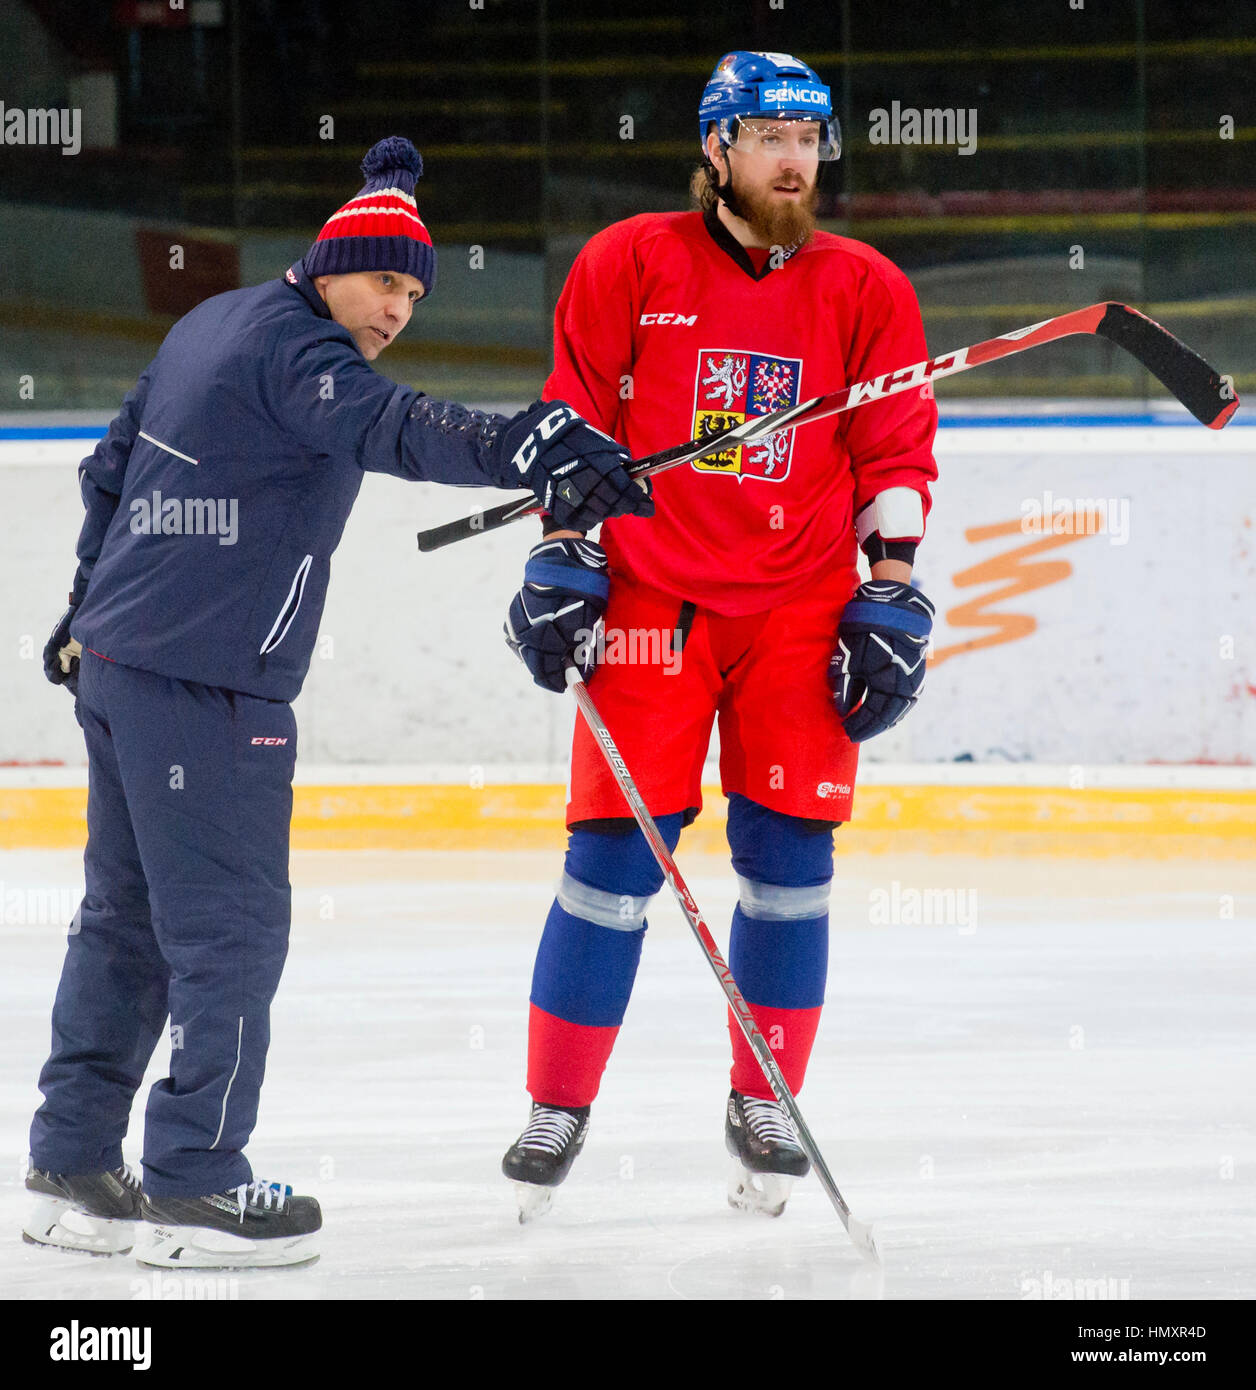 Prague, Czech Republic. 07th Feb, 2017. The Czech national ice-hockey team's coach Josef Jandac (left) and player Lukas Kaspar in action during the training session prior to the February Sweden Games in Gothenburg in Prague, Czech Republic, February 7, 2017. Sweden Games, the third part of the European Hockey Tour (EHT) series, will take place on February 9-12. Credit: Vit Simanek/CTK Photo/Alamy Live News Stock Photo